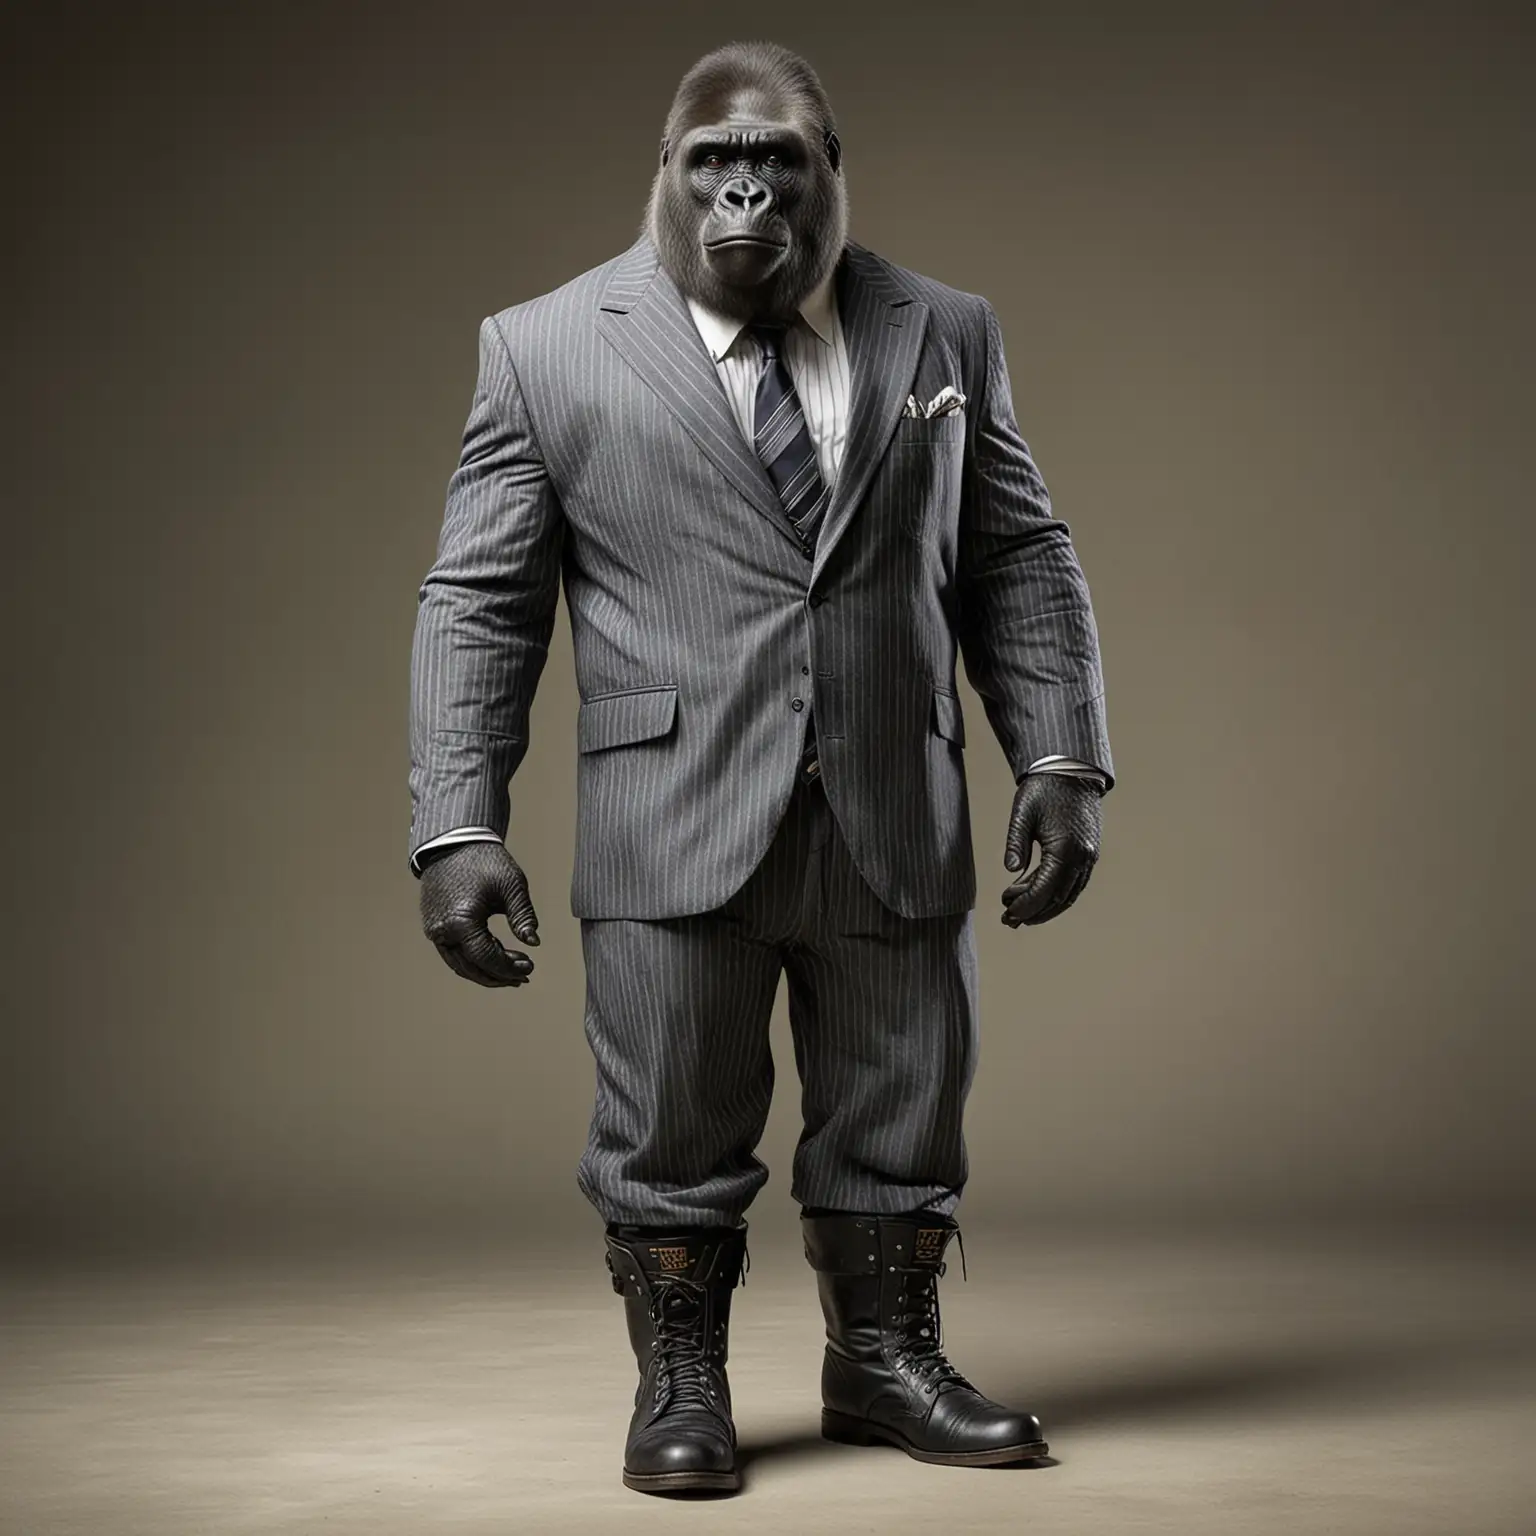 Dapper Gorilla in Pinstriped Suit and Boots